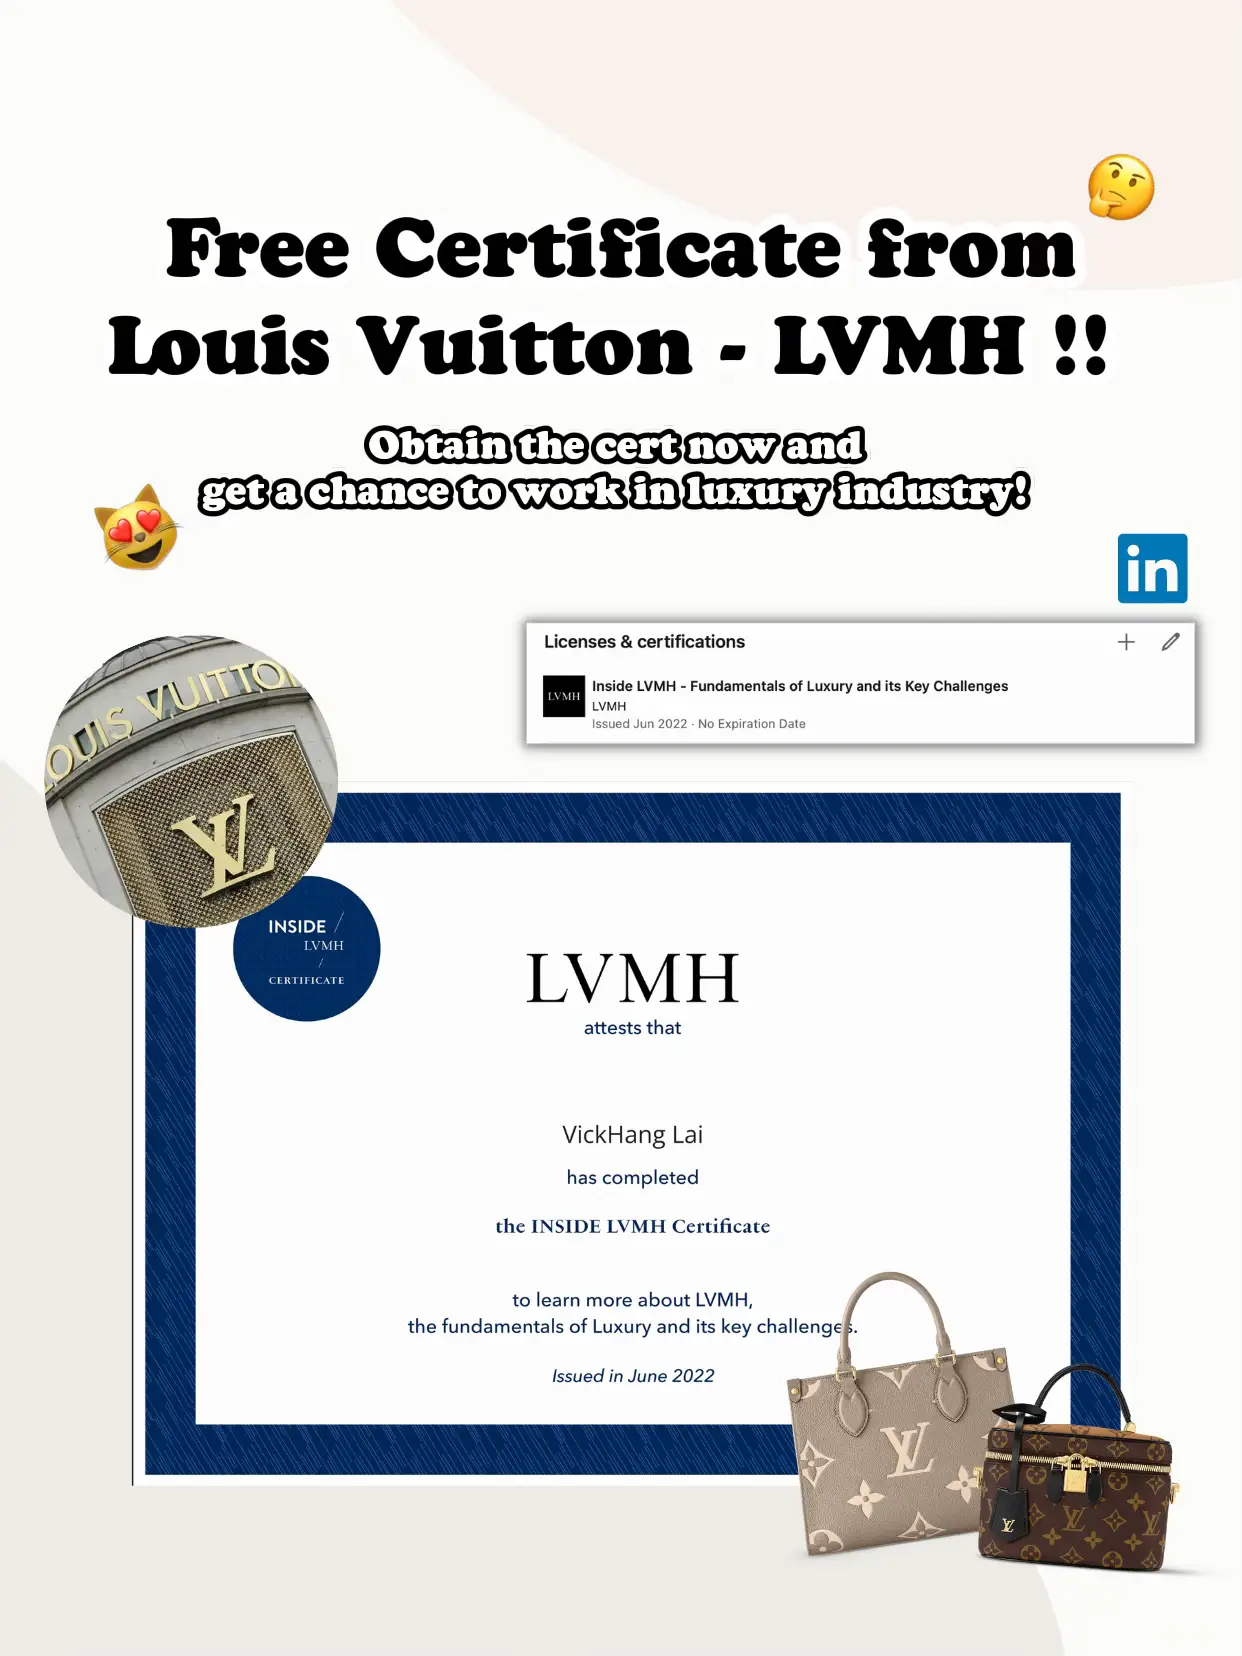 LVMH on X: Each year LVMH and its Maisons welcome 7,500 interns and recent  graduates around the world. LVMH has launched the #INSIDELVMH Program to  let top candidates from 50 partner universities